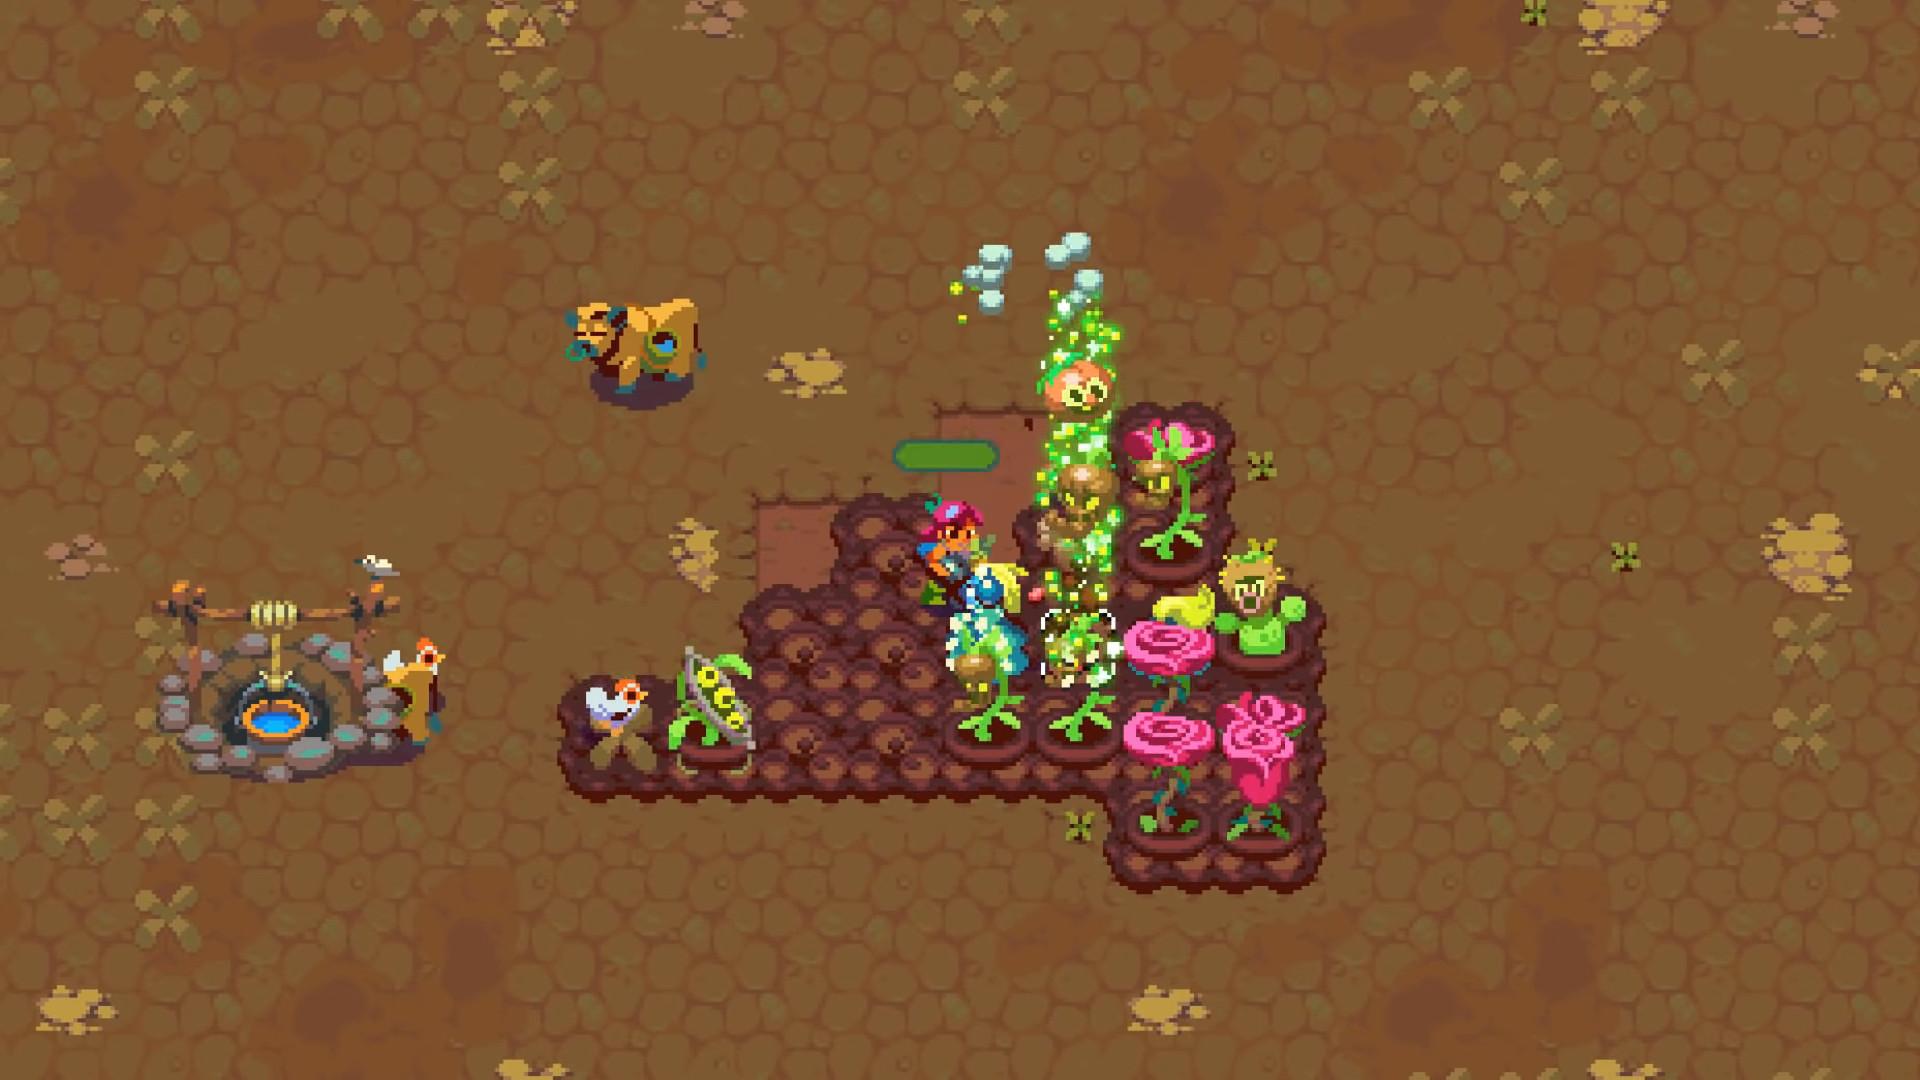 Atomicrops Brings Roguelite Action and Radioactive Farming in 2019